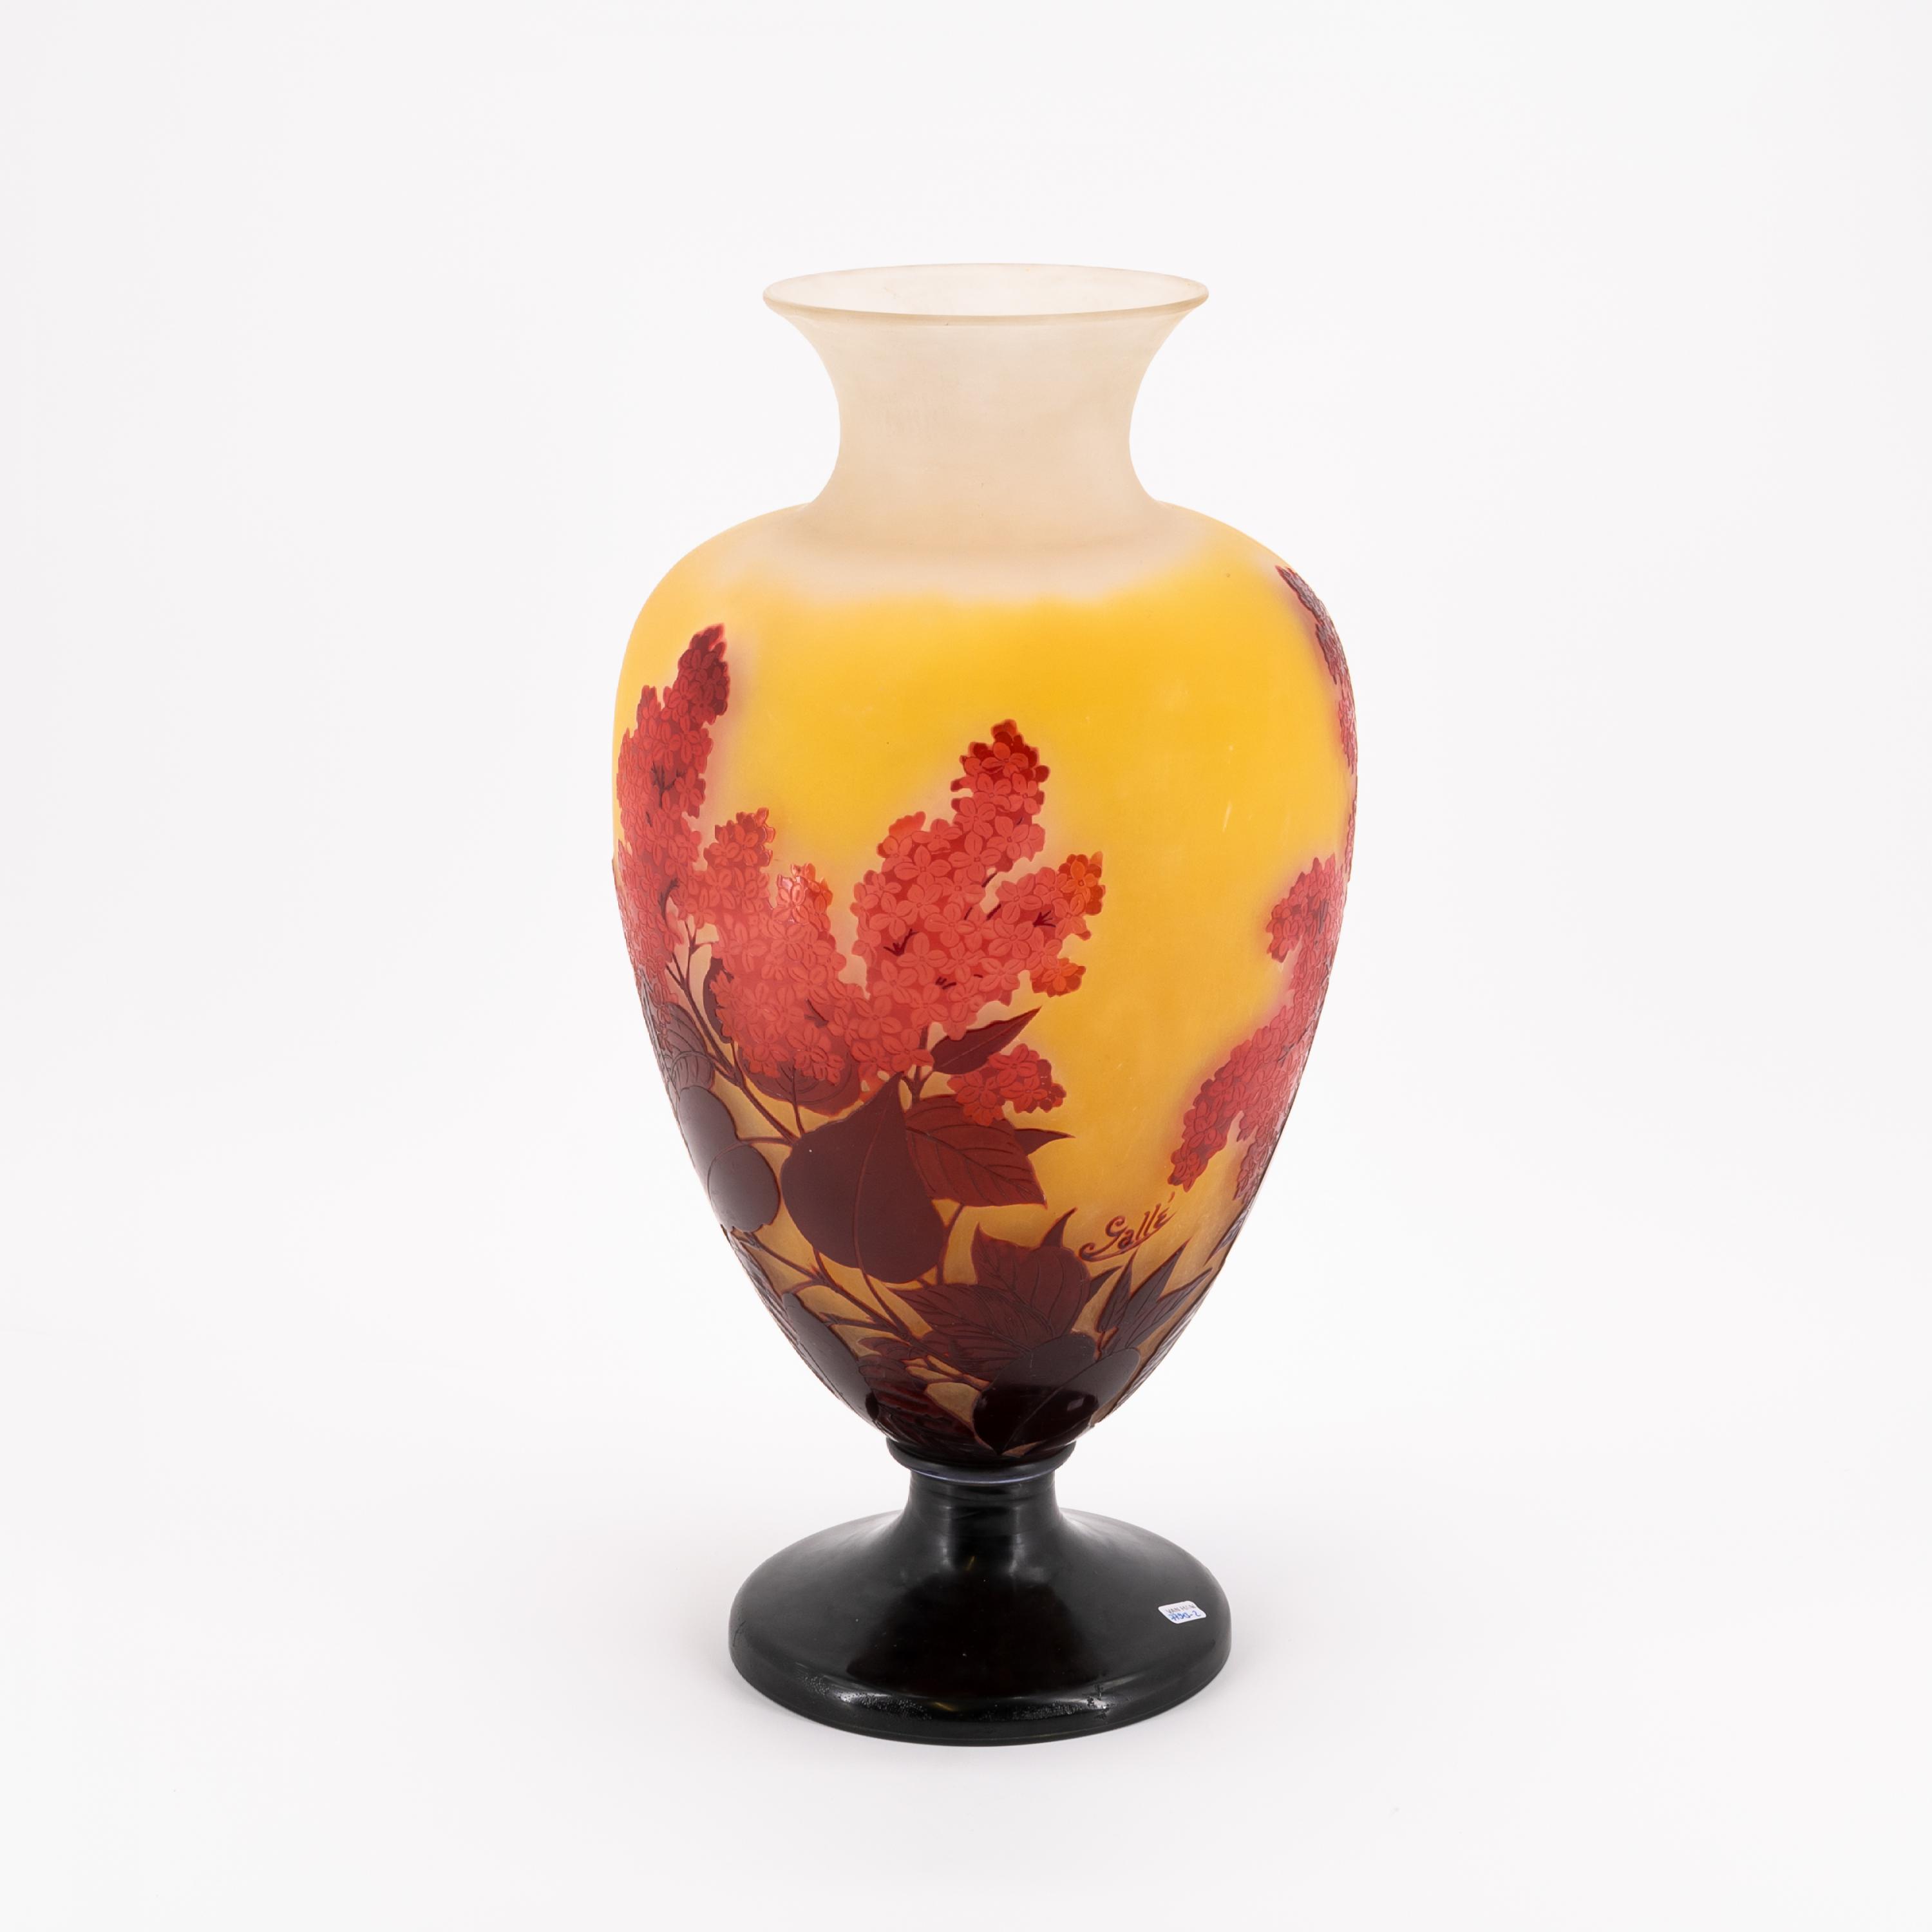 LARGE GLASS GOBLET VASE WITH LILAC BLOSSOMS - Image 3 of 8